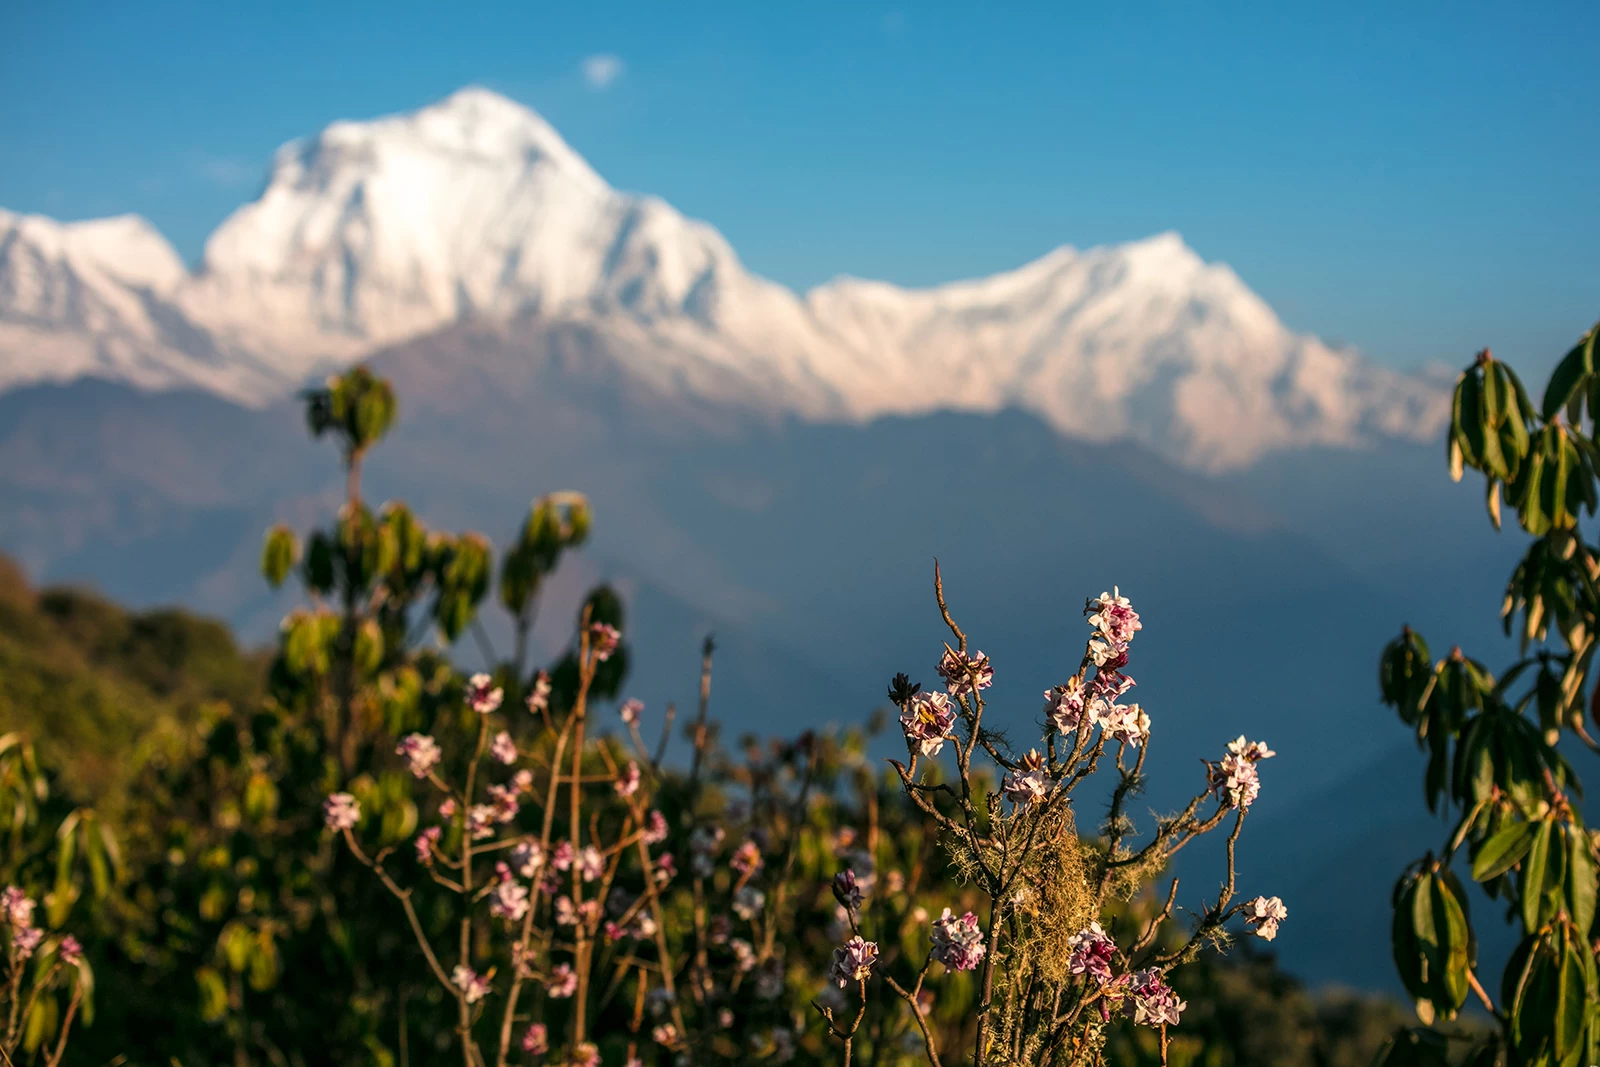  Mount Dhaulagiri view from Poon Hill. 